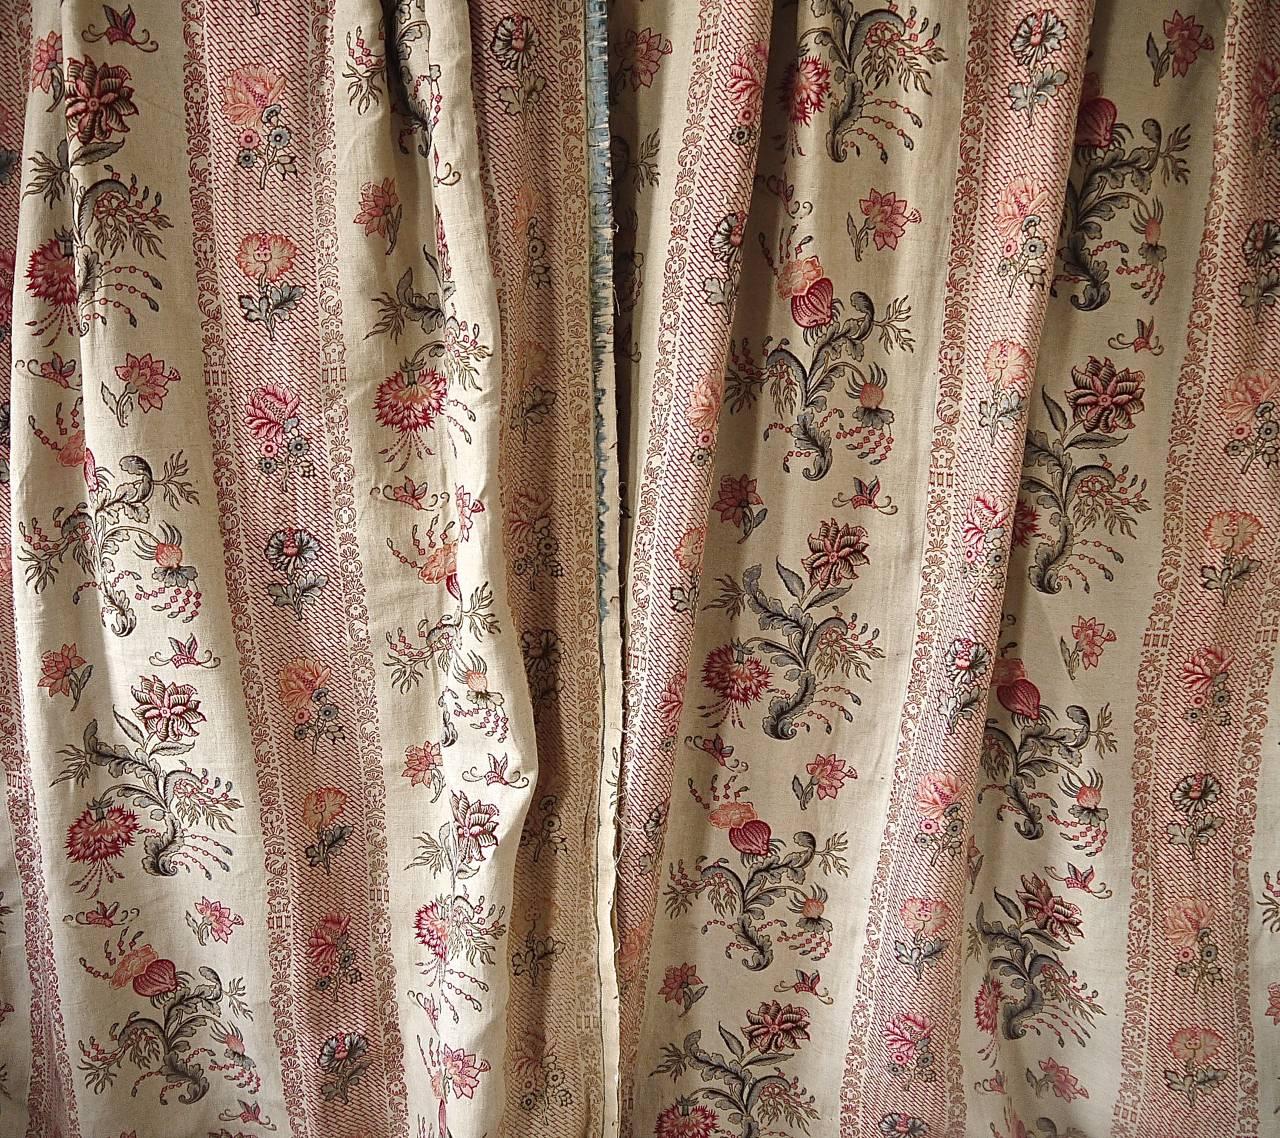 Pair of Indienne Flower Linen Curtains 19th Century French Antique 5